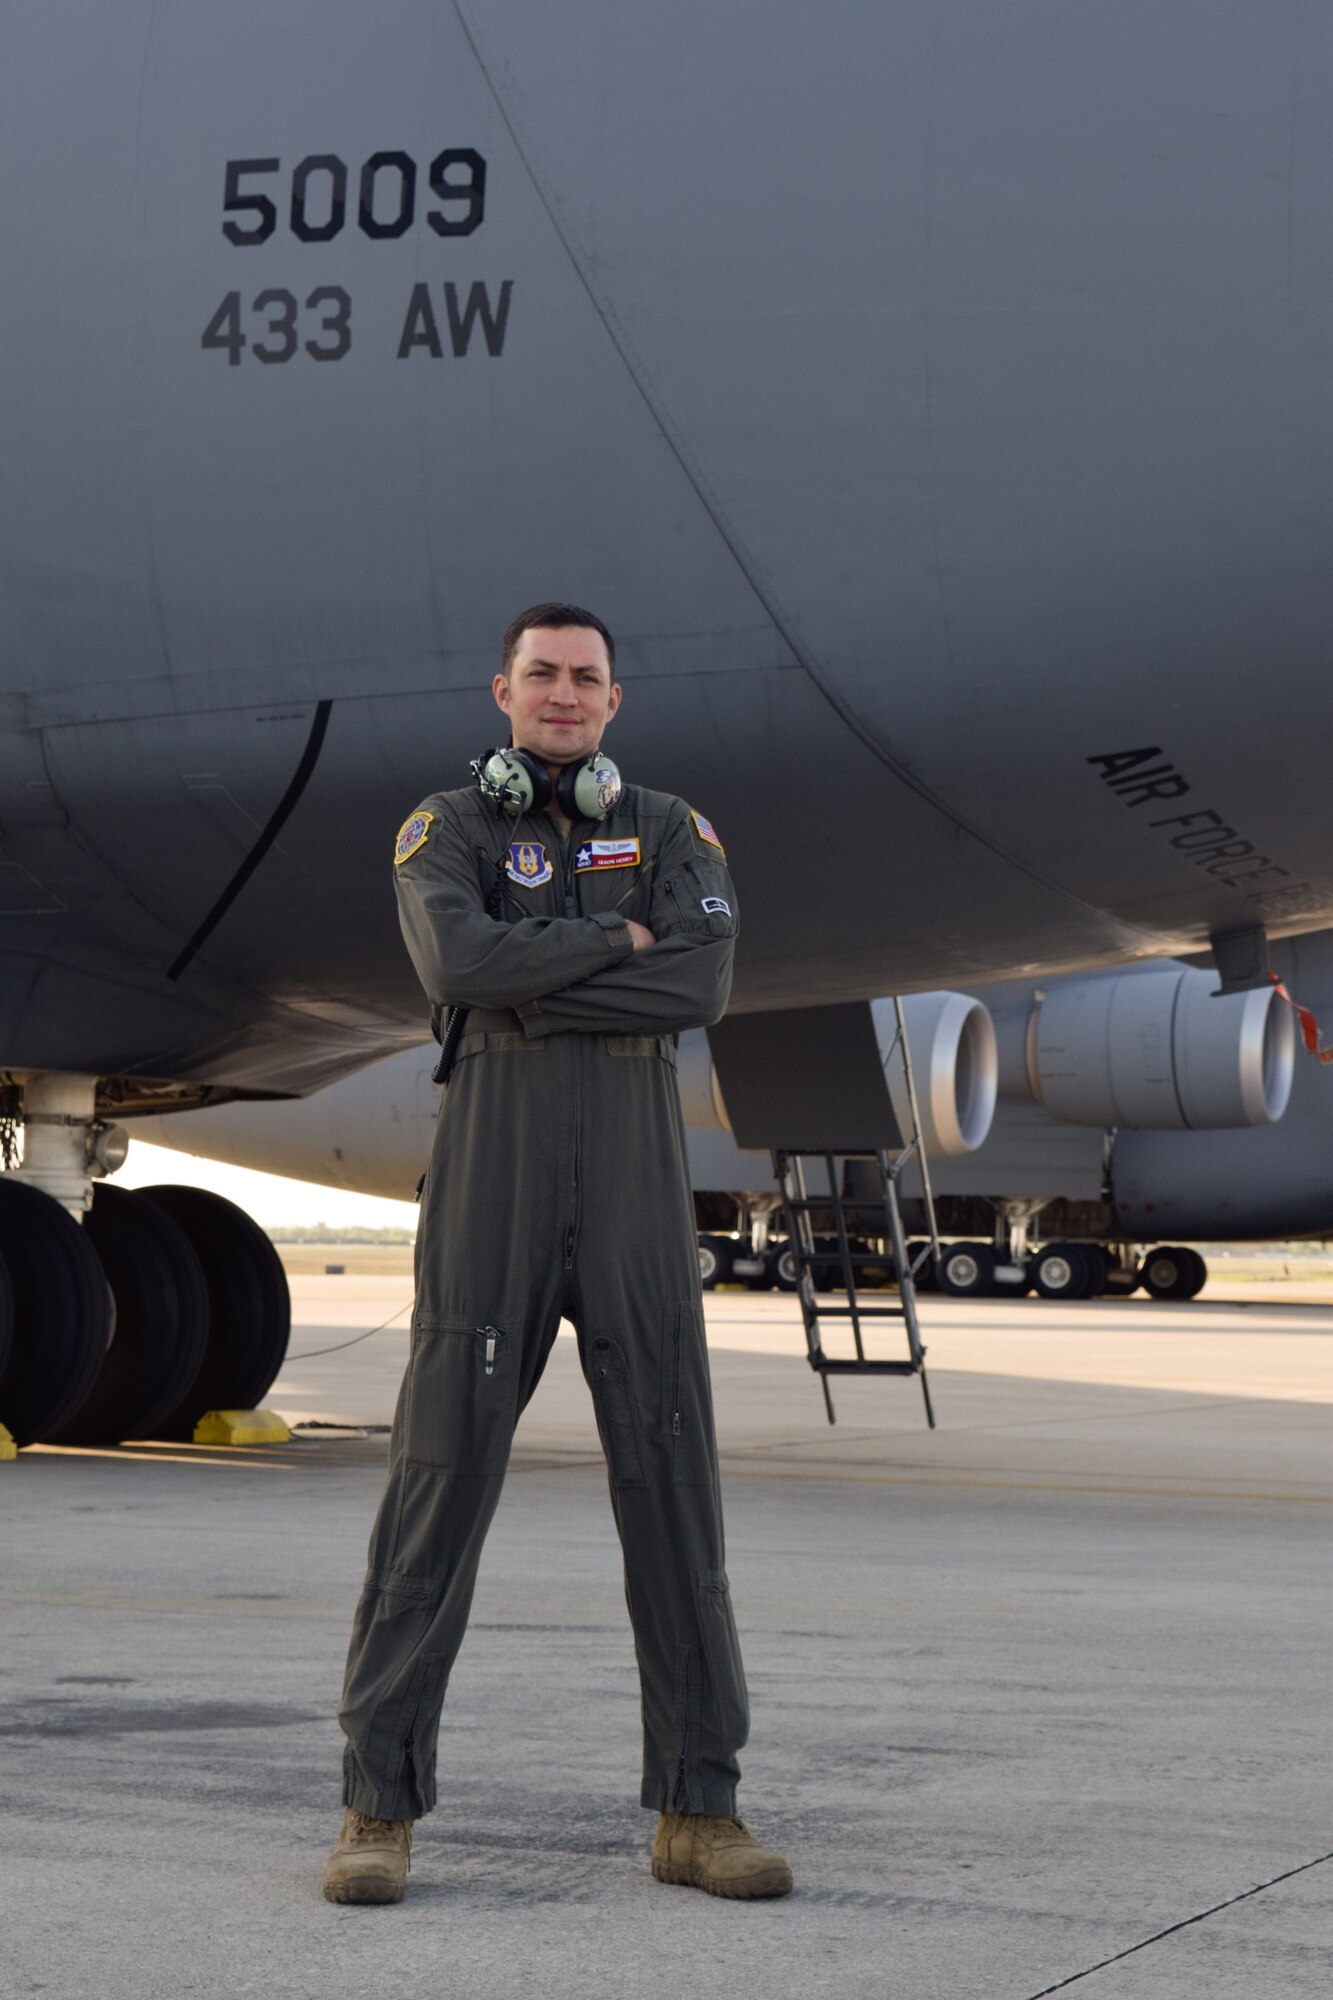 Master Sgt. Jason Henry, 733rd Training Squadron flight engineer instructor, stands in front of a C-5M Super Galaxy at Joint Base San Antonio-Lackland, Texas, March 25, 2021. Henry has served in various roles during his 18 years of service in the Air Force. (U.S. Air Force photo by Senior Airman Brittany Wich)